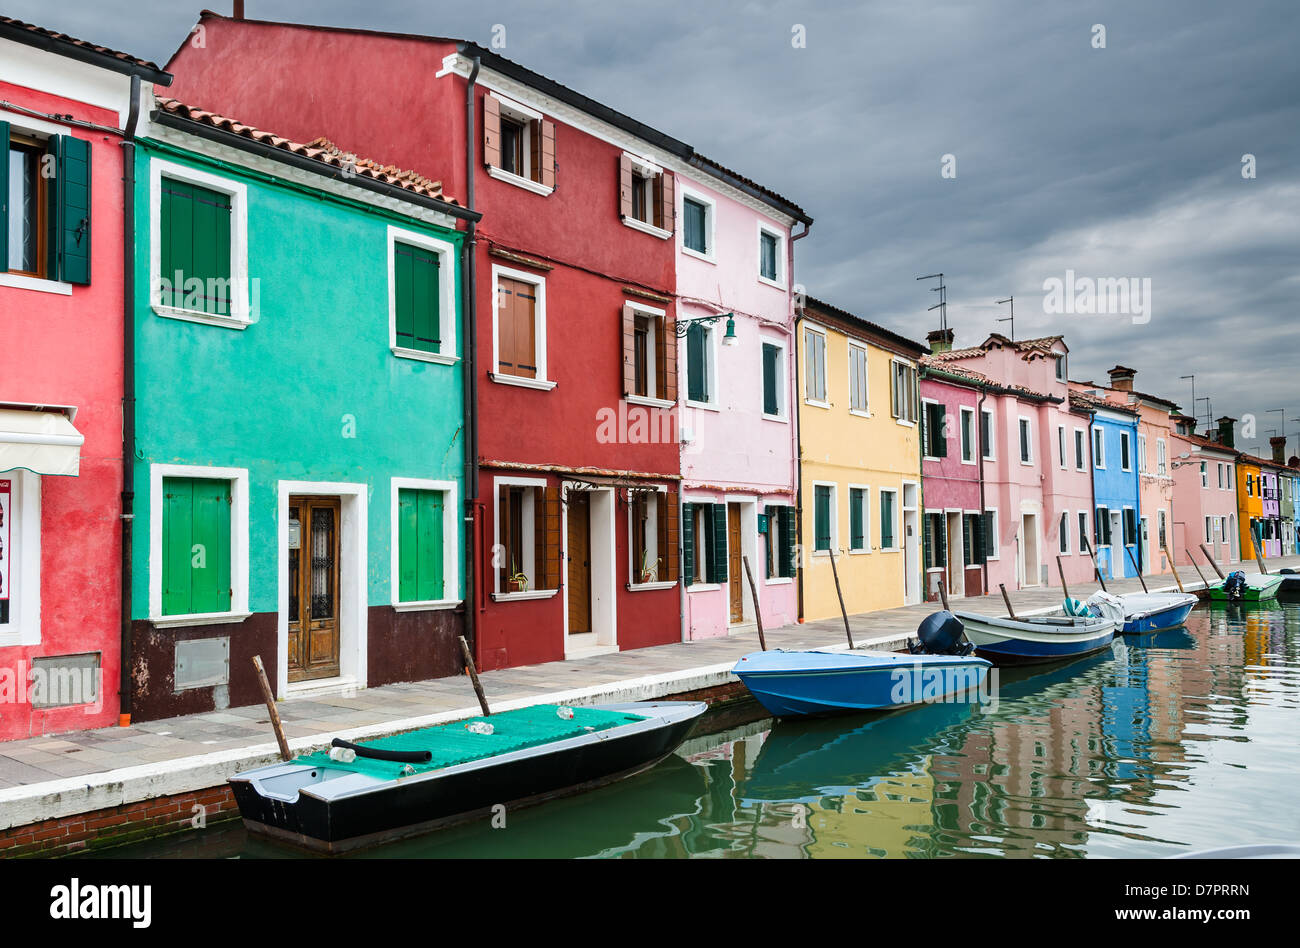 Image with colorful houses in Burano, island and landmark of Veneto region, Venice, in Italy Stock Photo